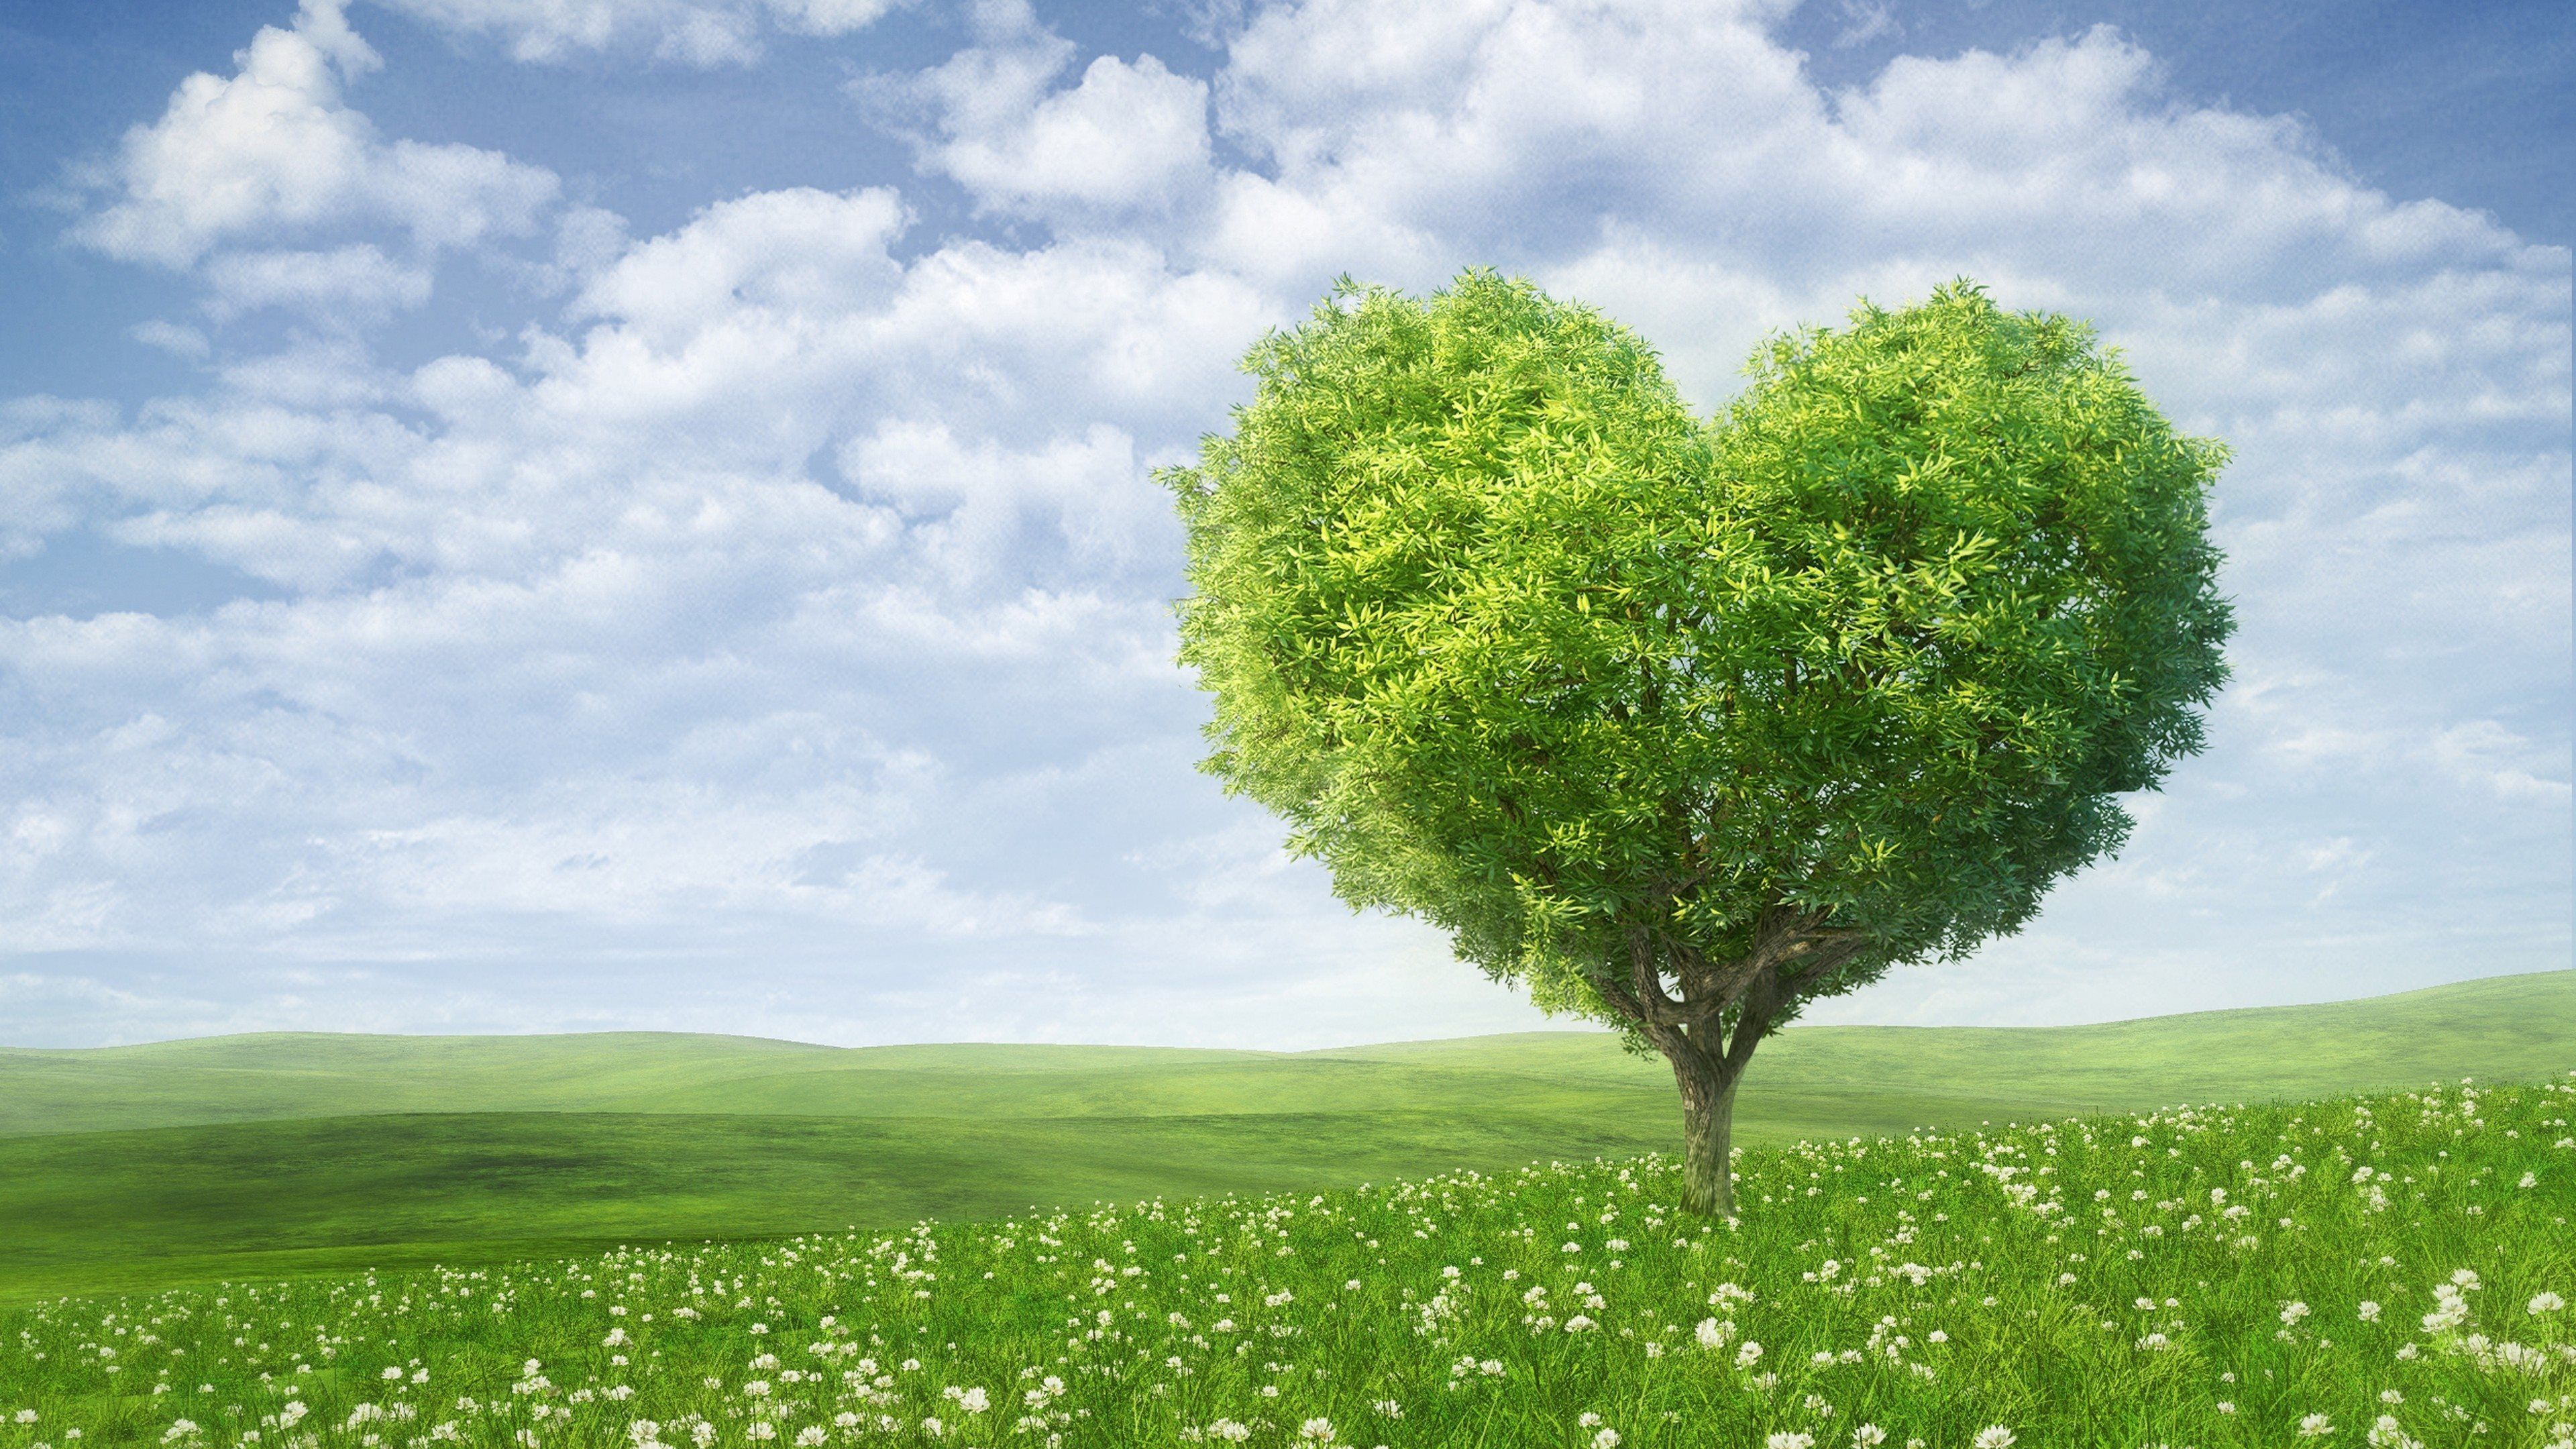 Download 4k wallpaper heart tree, save the planet, ecology, save